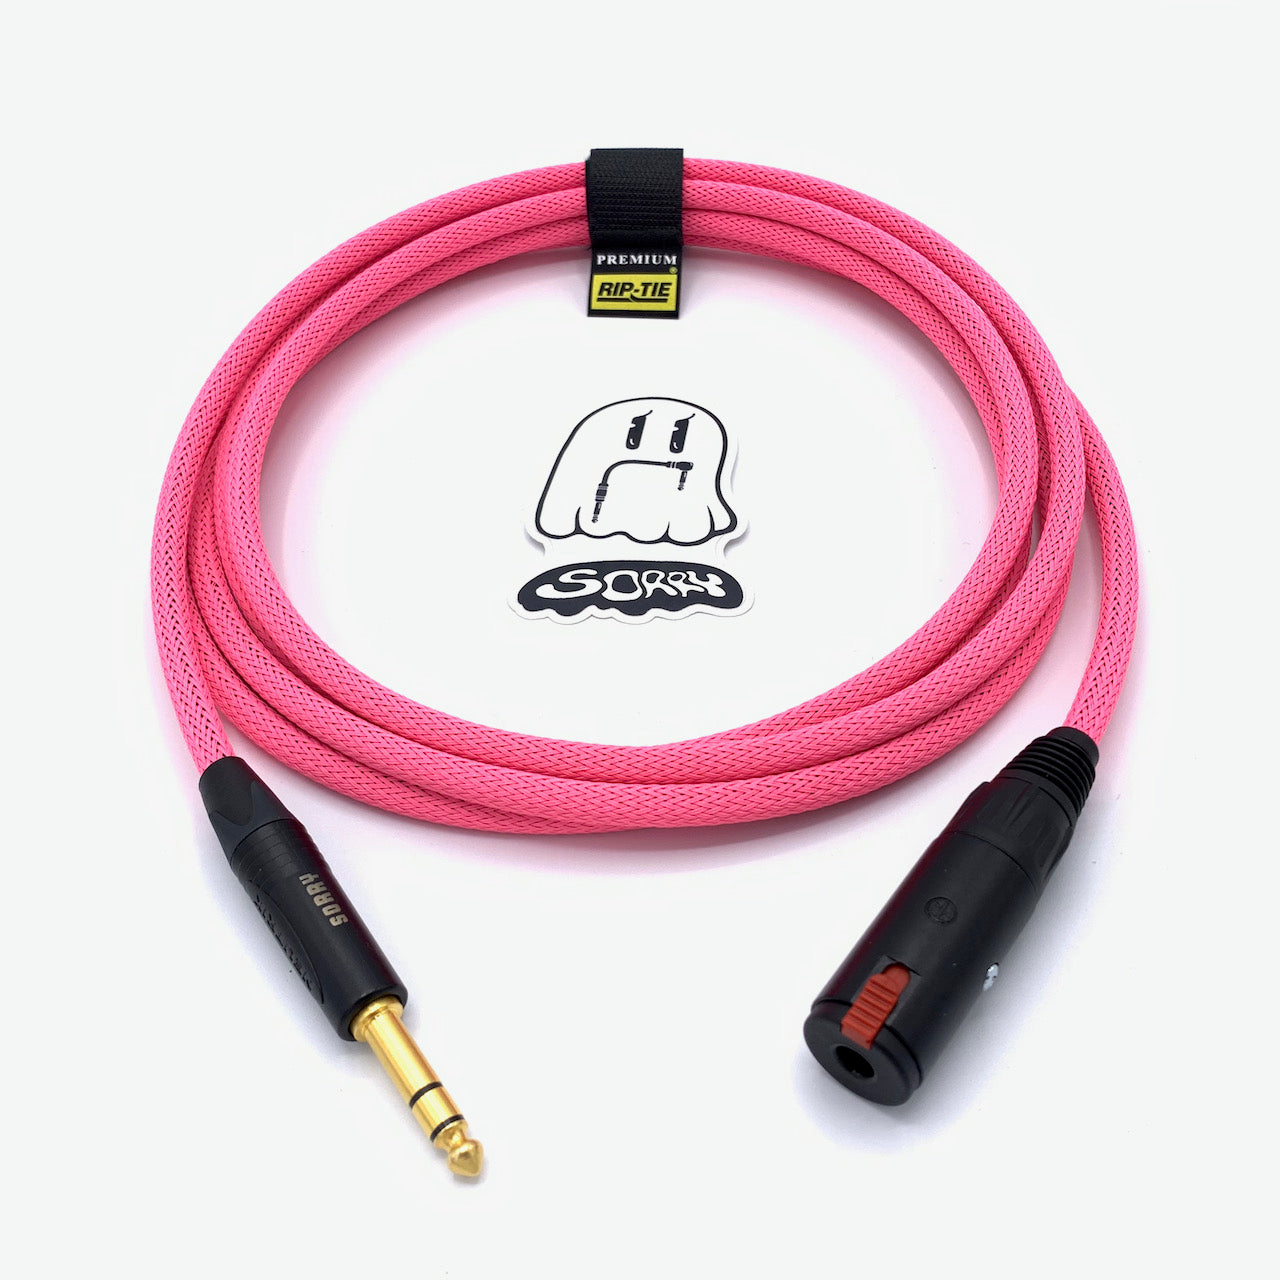 SORRY Locking Headphone Extension Cable - Neon Pink